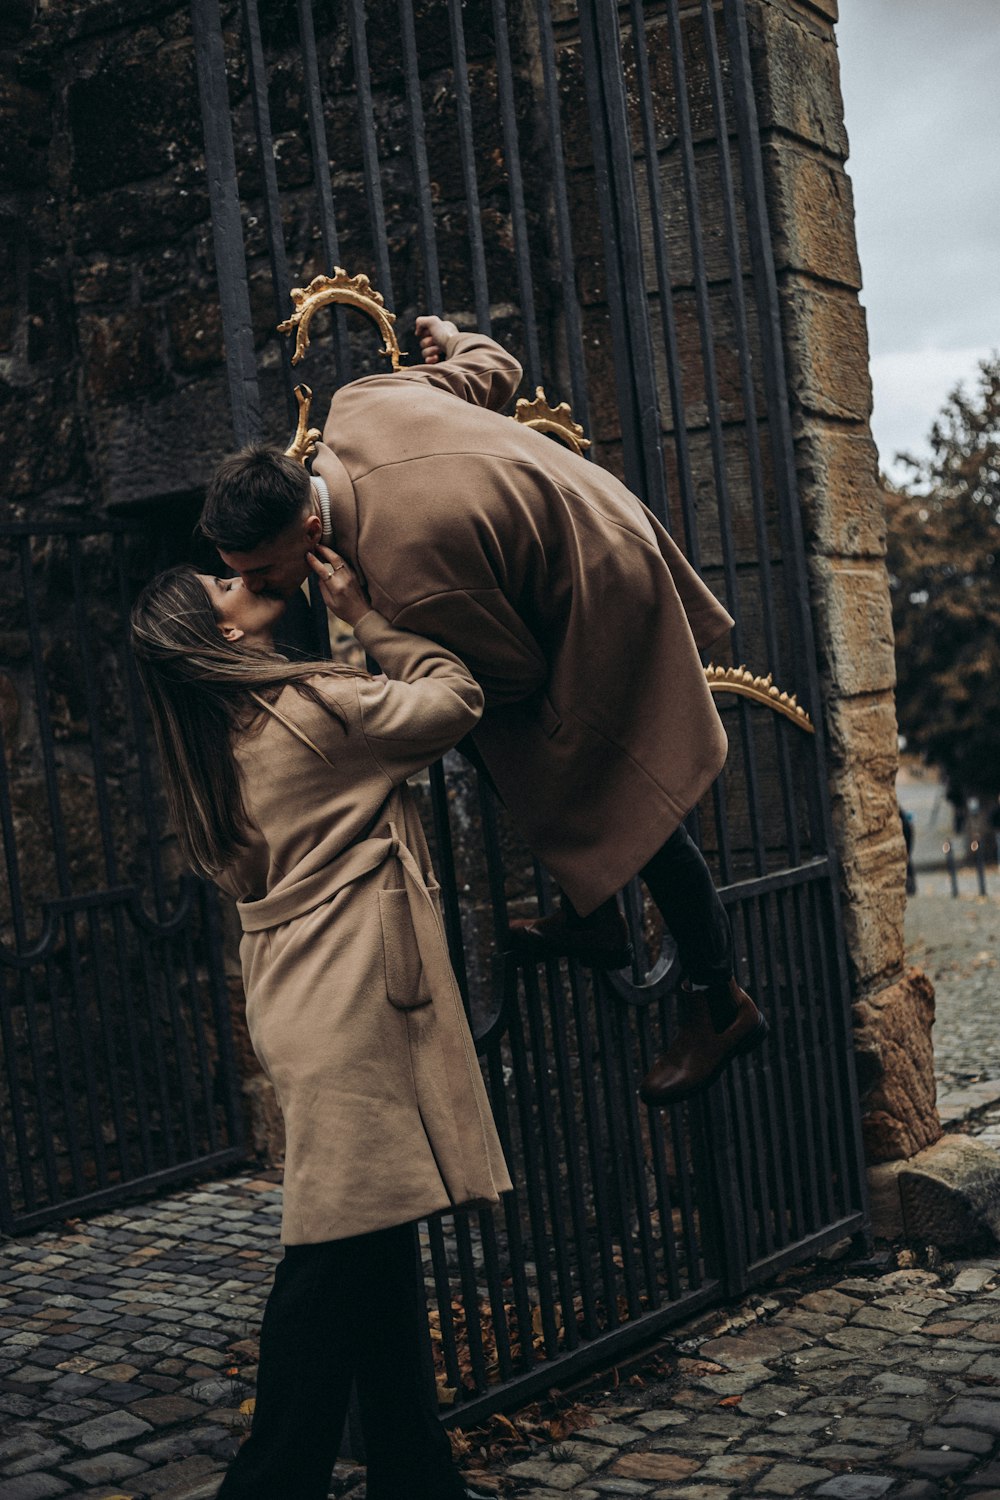 a man and a woman kissing in front of a gate